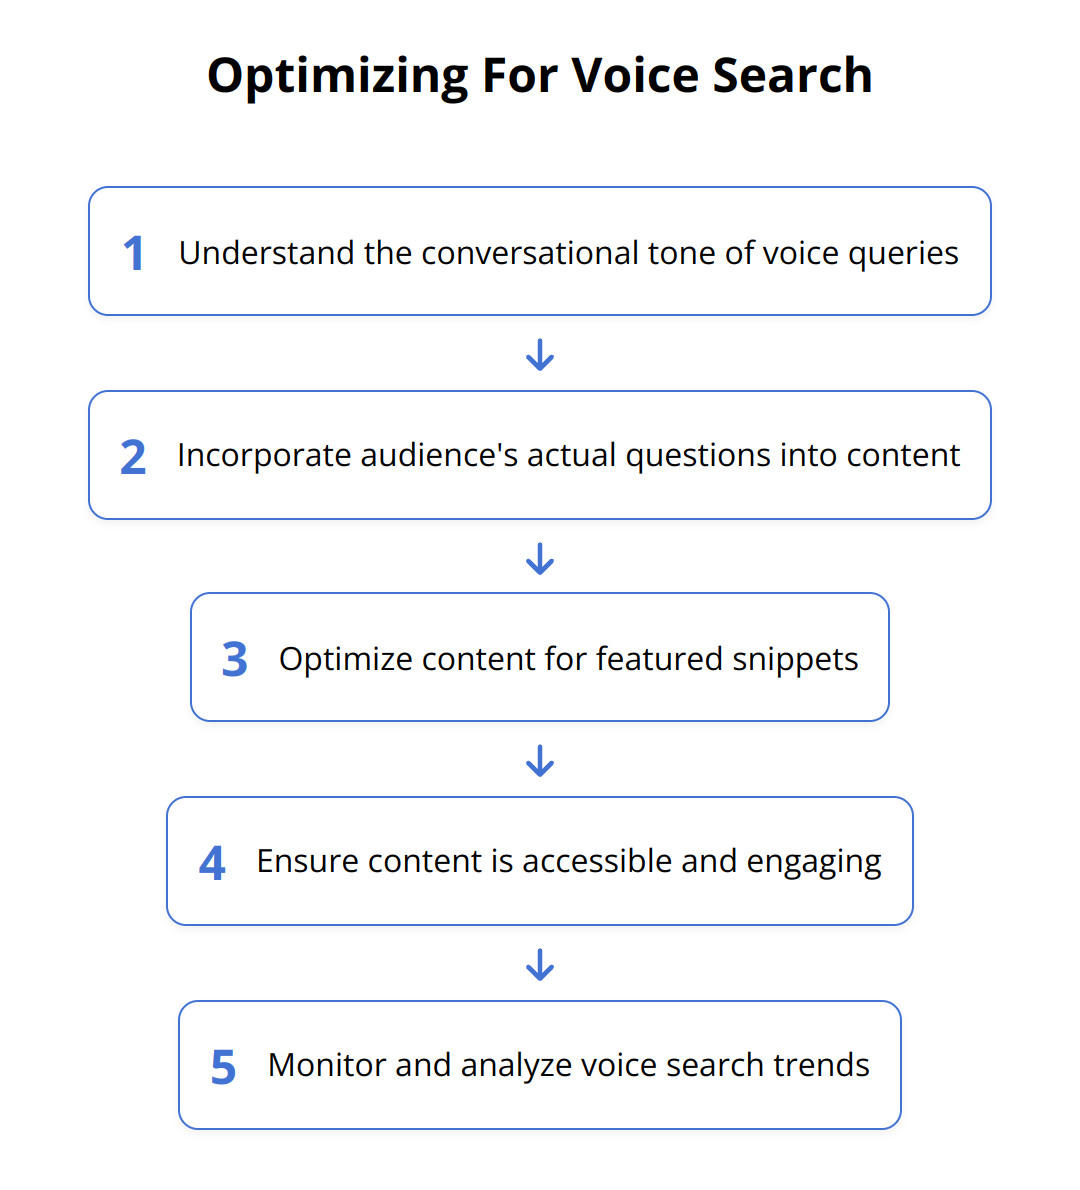 Flow Chart - Optimizing For Voice Search